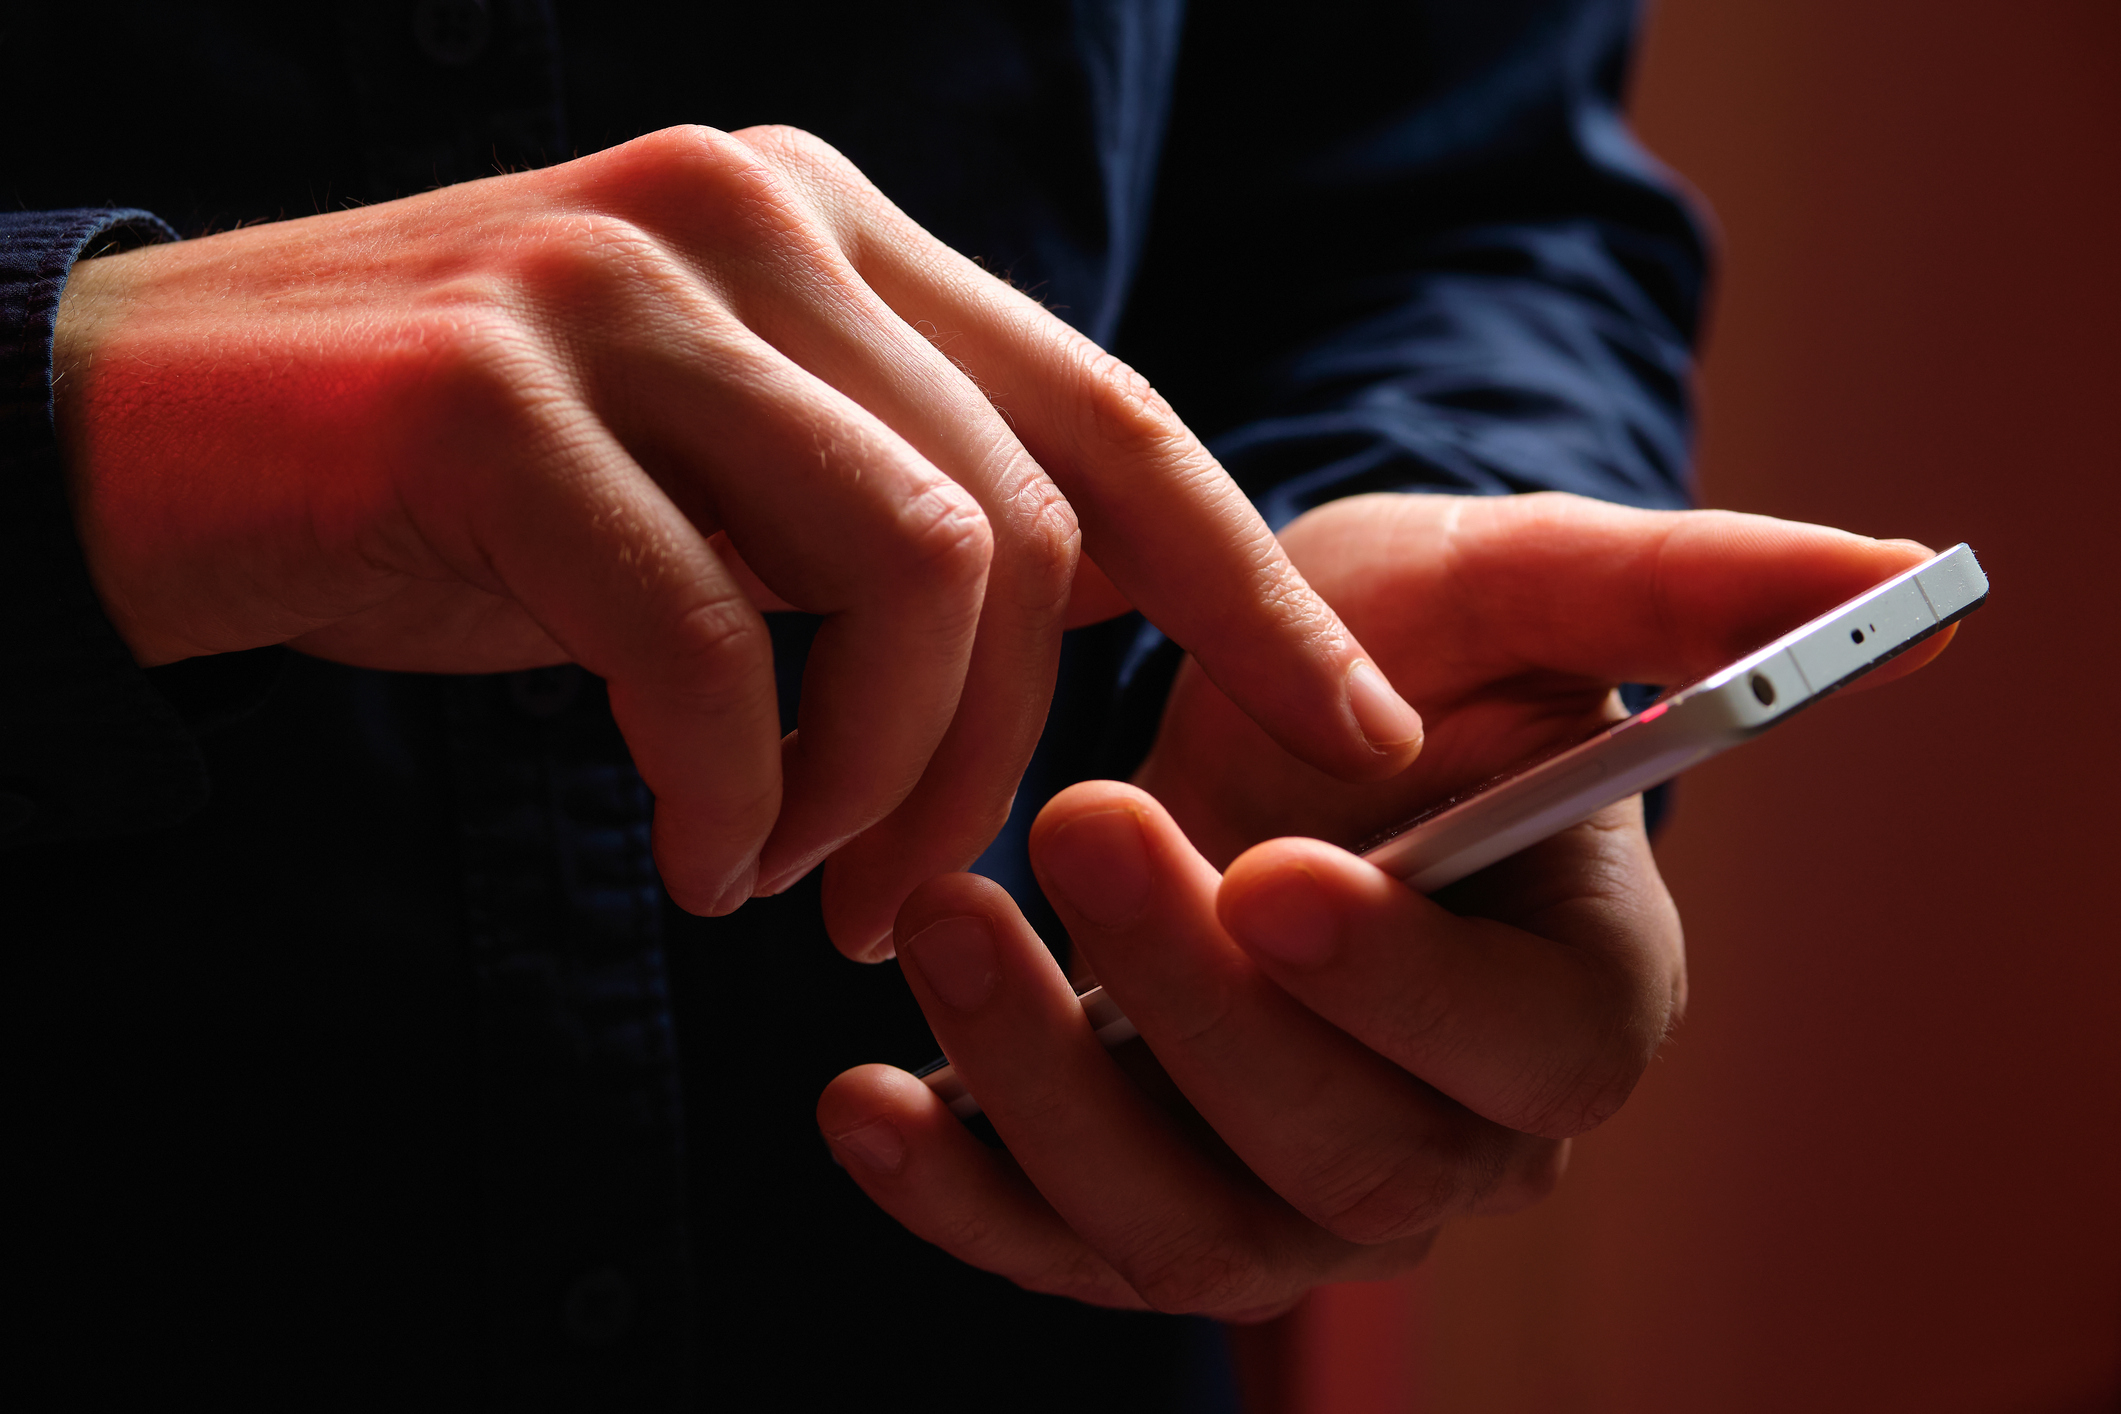 Close-up image of an adult&#x27;s hands using a smartphone, tapping and scrolling on the screen